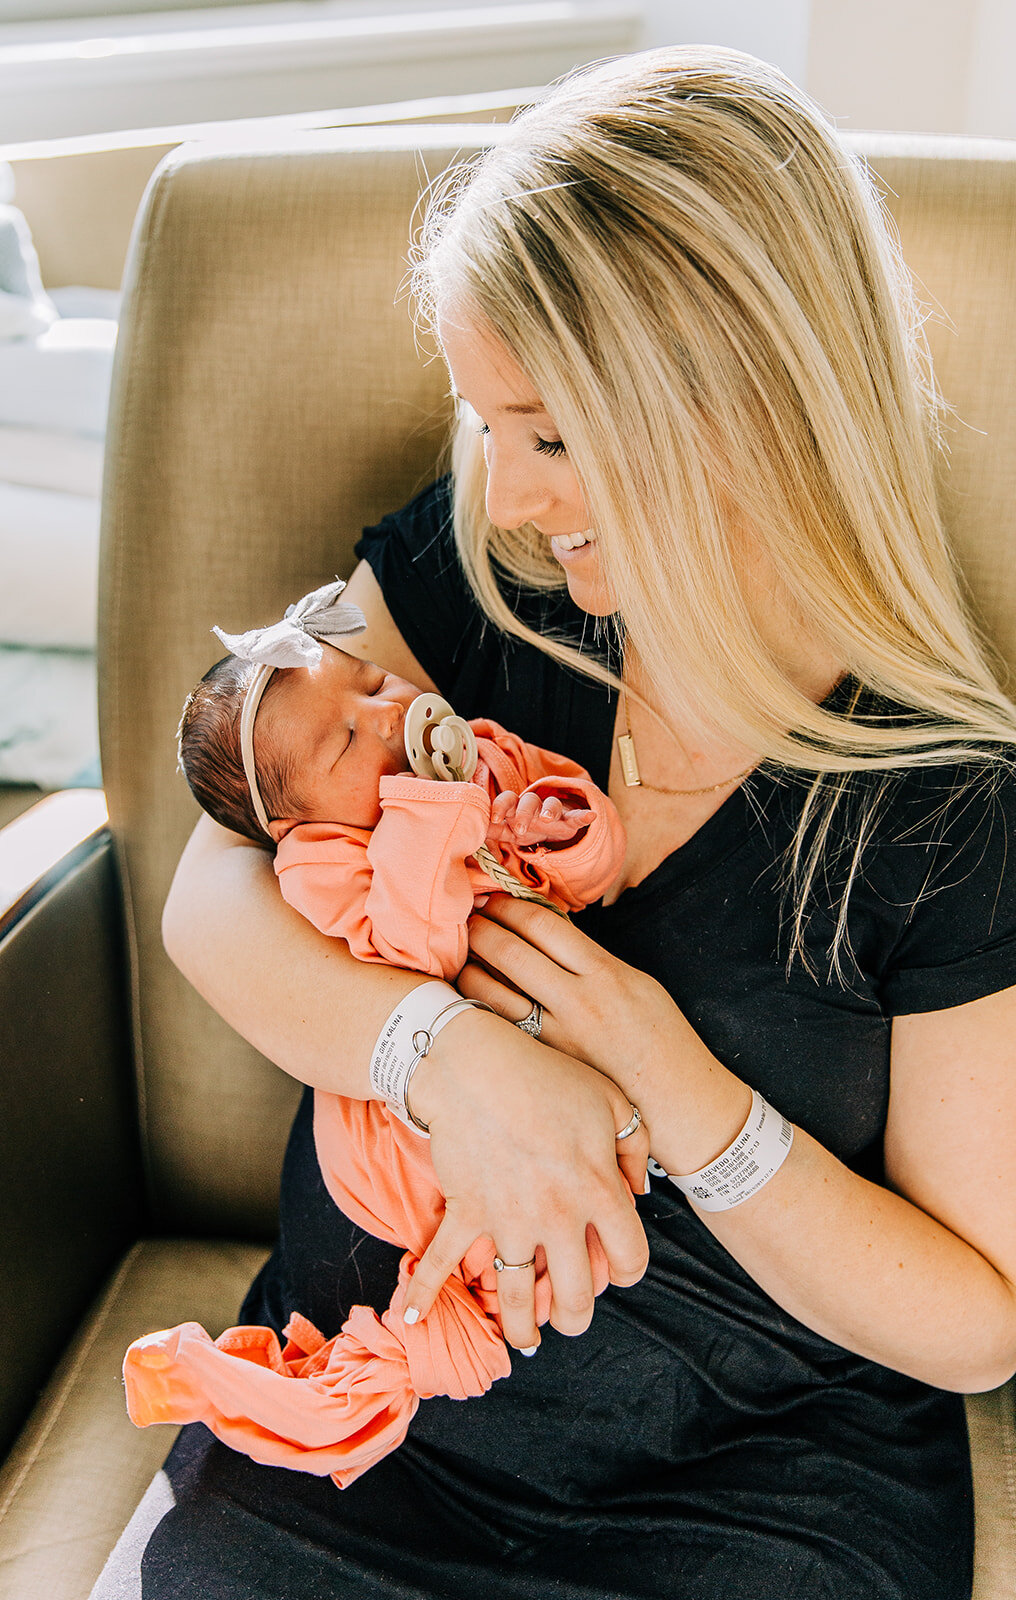  birth story newborn photos in logan regional hospital professional baby photographer family photos fresh 48 affordable newborn session logan utah pink dress baby girl with her mom mommy and me new mom first time mom holding her baby girl grey boy he